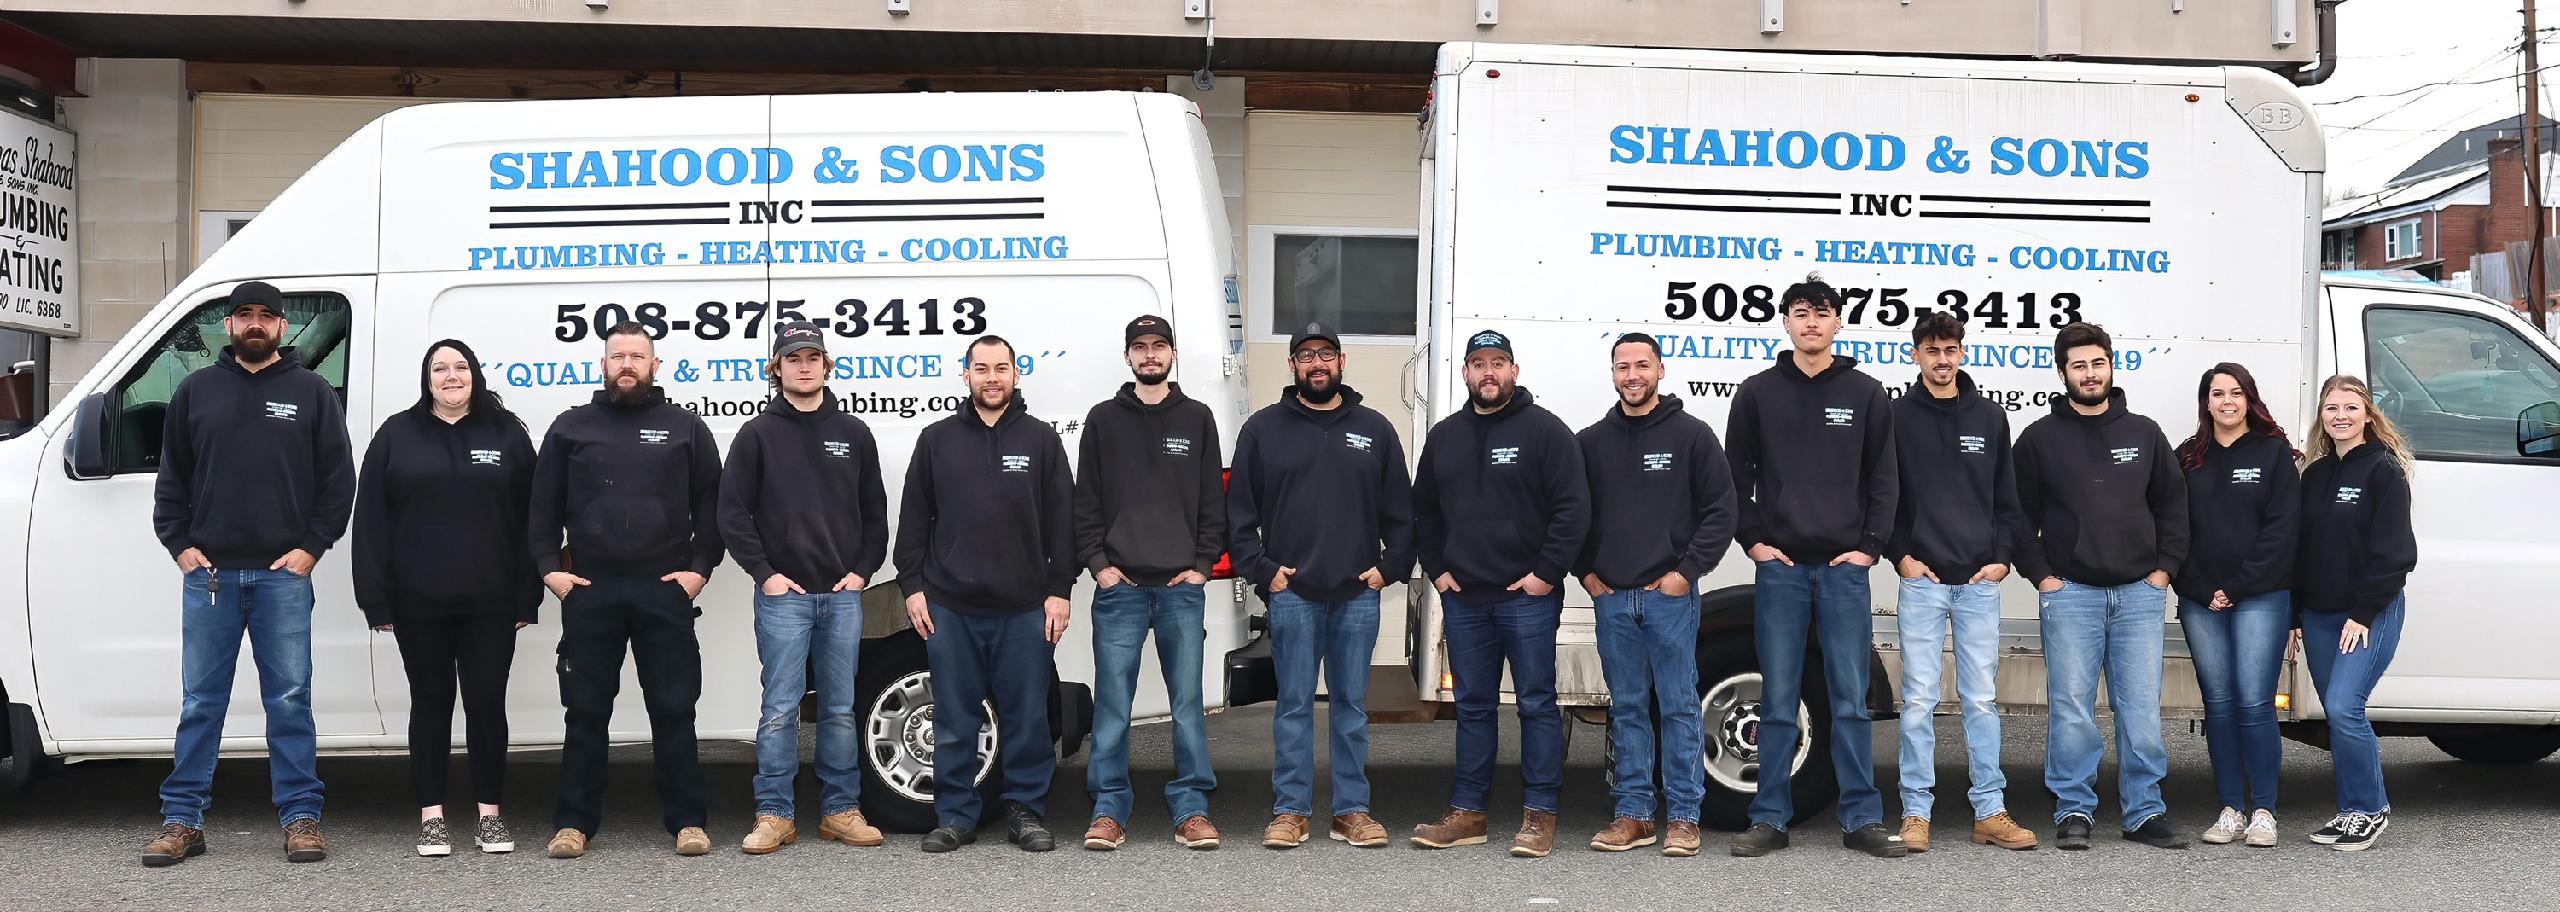 Business Profile: Shahood & Sons prepares homes for the heat